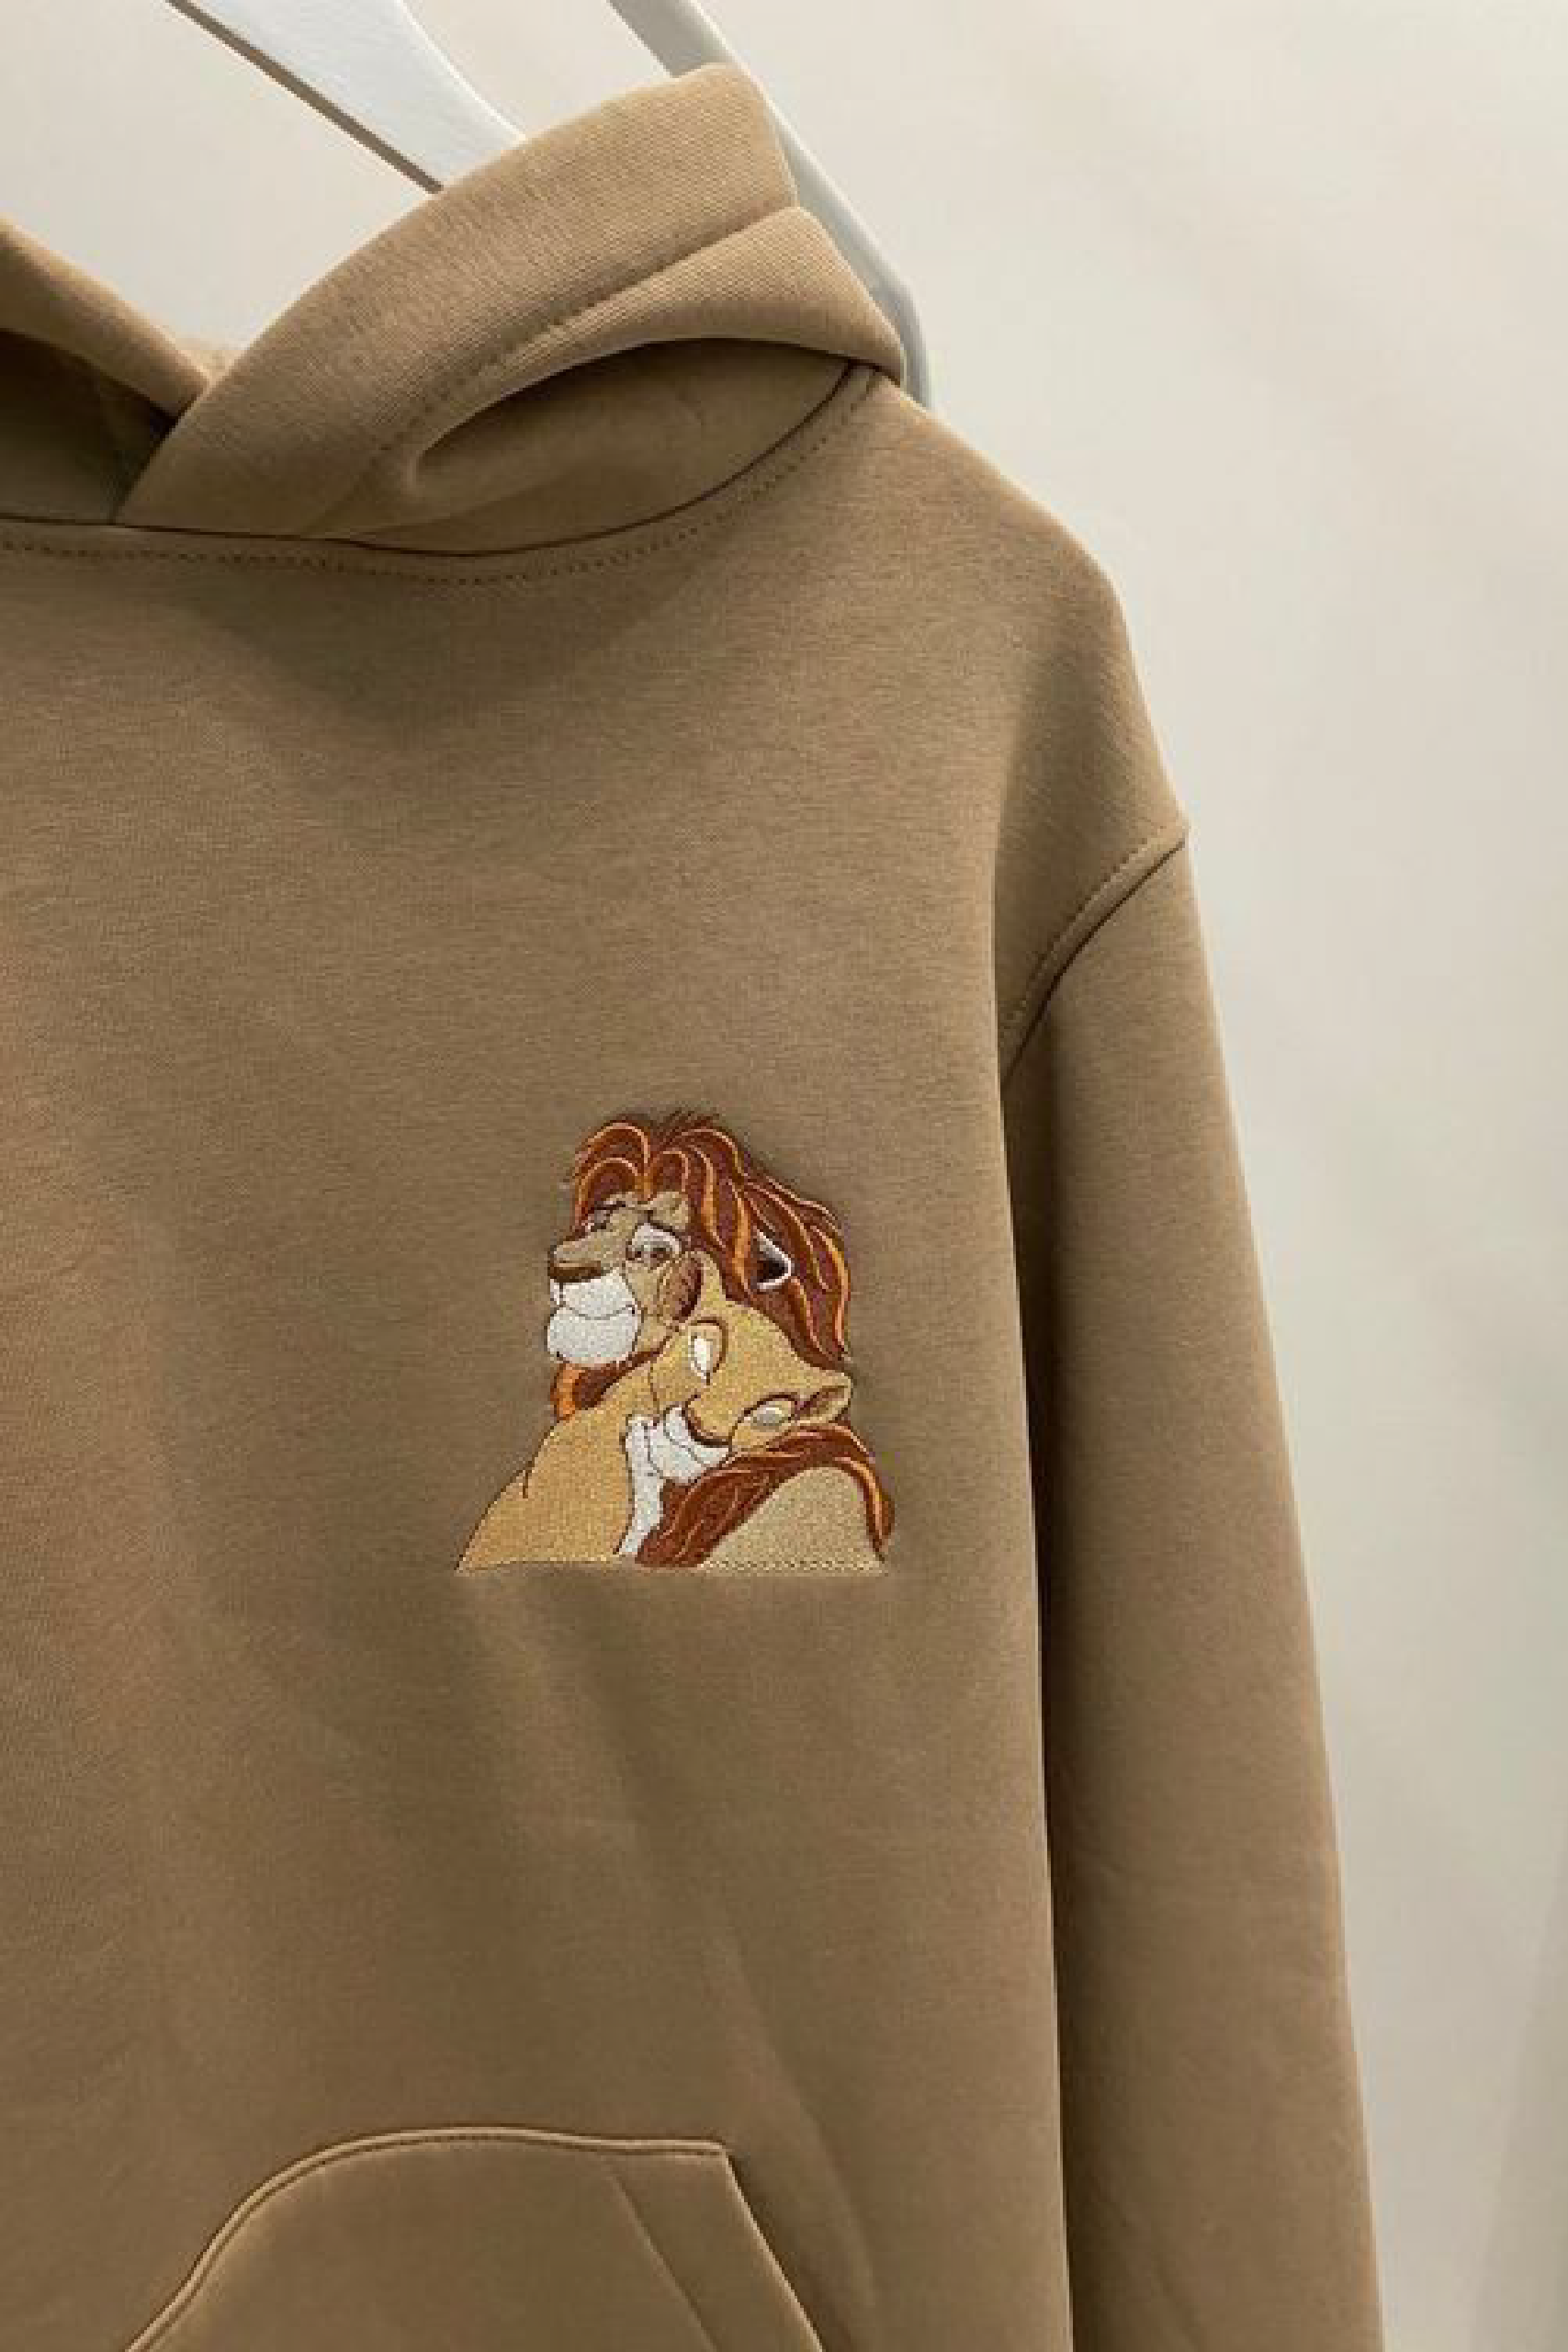 Embroidered Lion And Lioness Hoodies Cartoon Shirt-01